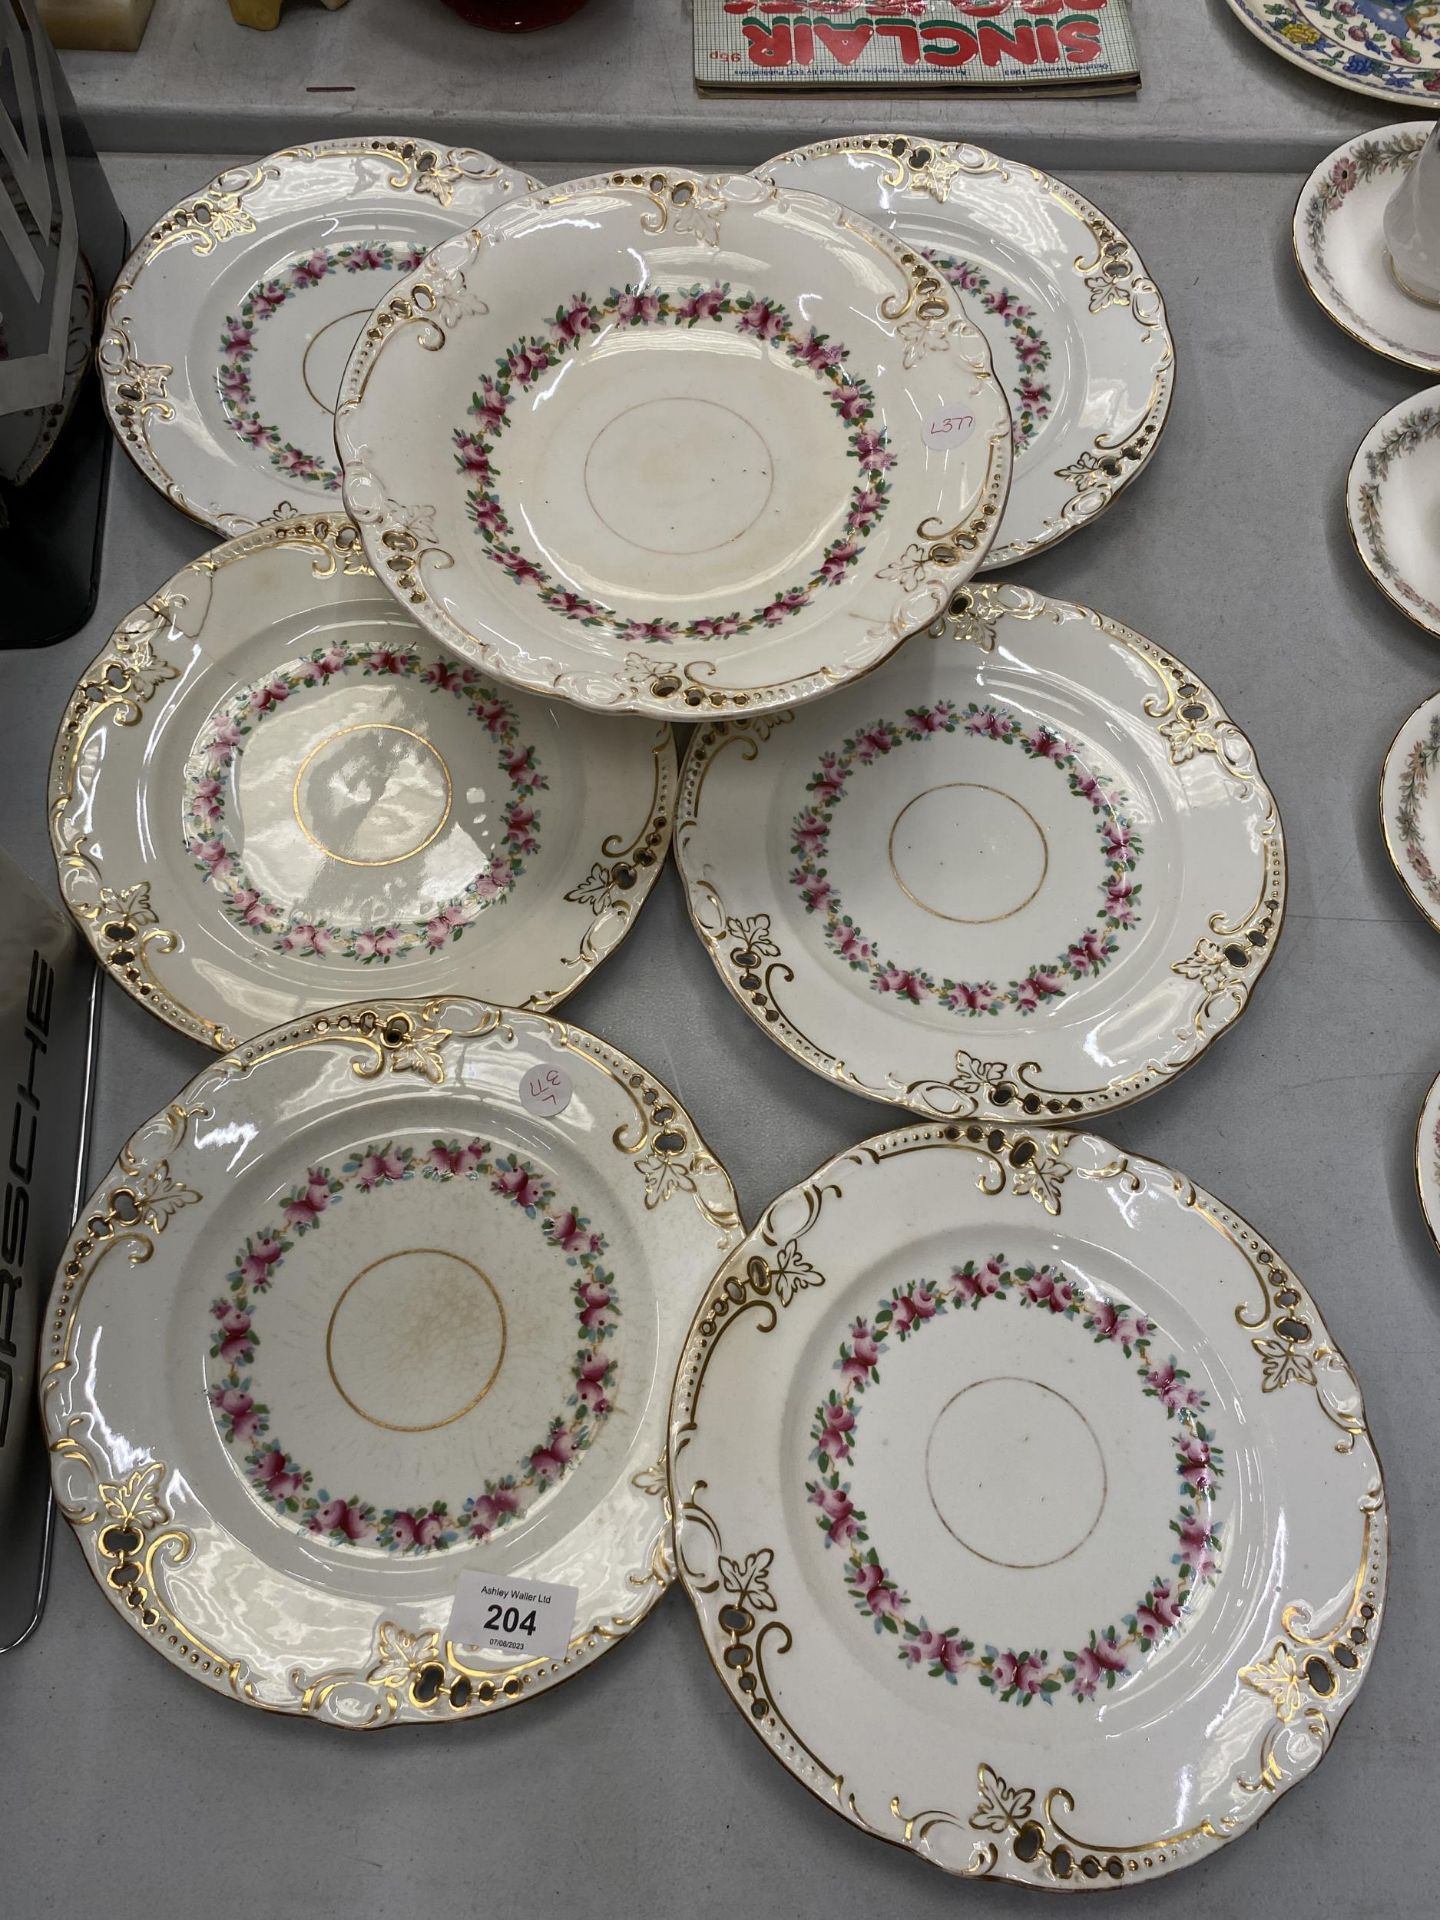 A SET OF SIX VICTORIAN PORCELAIN PLATES AND A COMPORT, HANDPAINTED WITH PIERCED EDGES